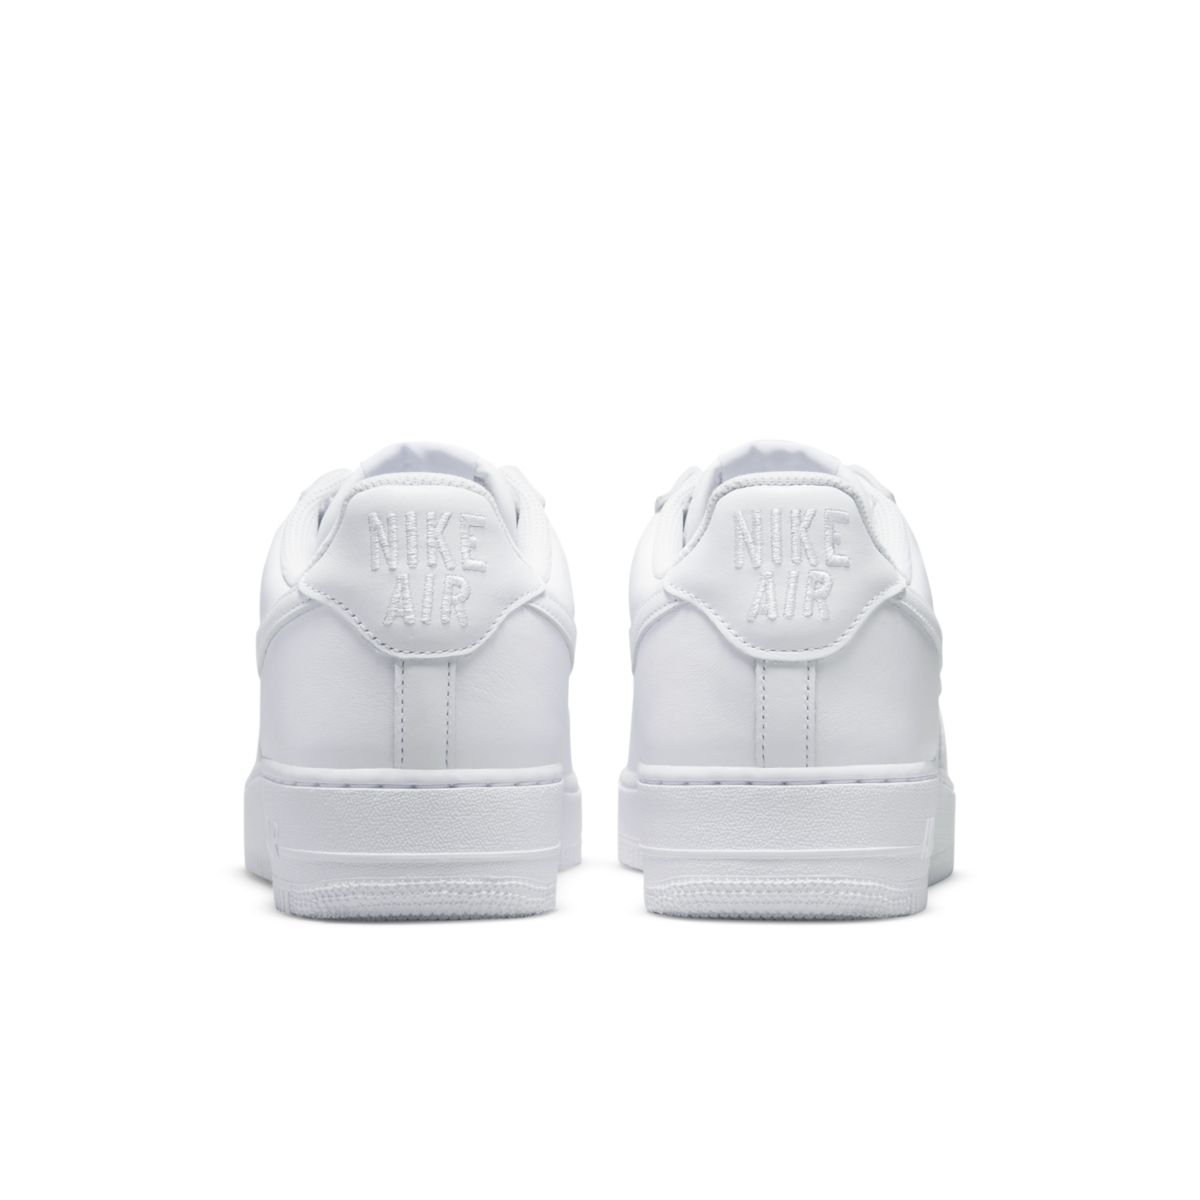 nike air force 1 low white color of the month DJ3911-100 6